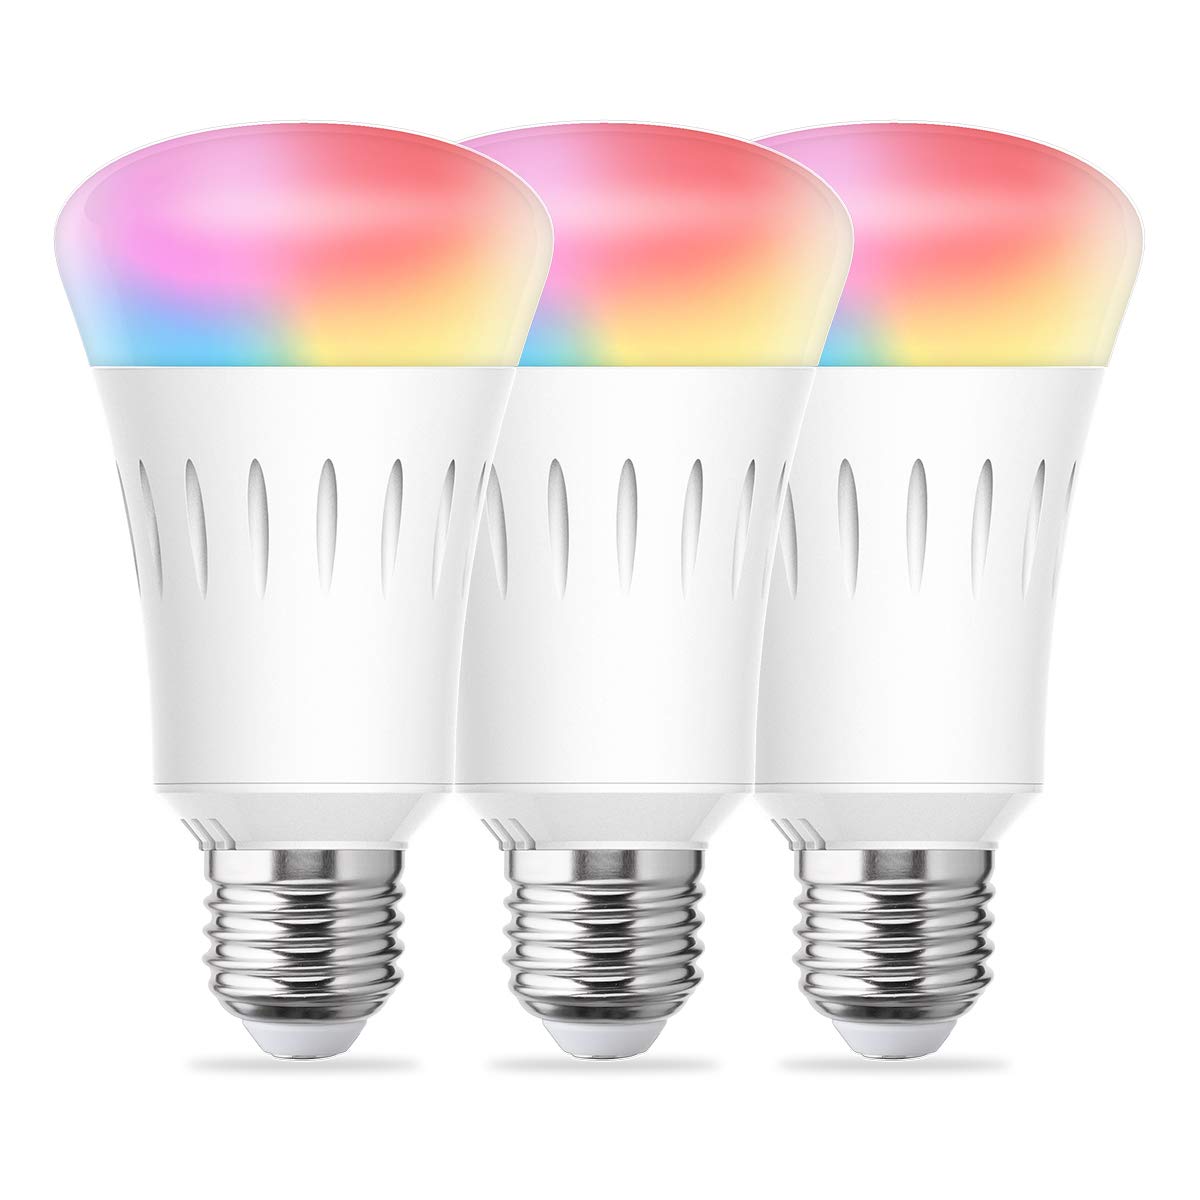 E26 Base 60W Equivalent LED Wireless Smart Home Lighting Compatible with Alexa Google Assistant Daylight Warm and Color Bulbs Dimmable LOHAS Smart Bulb 3Pack Wifi LED Light A19 